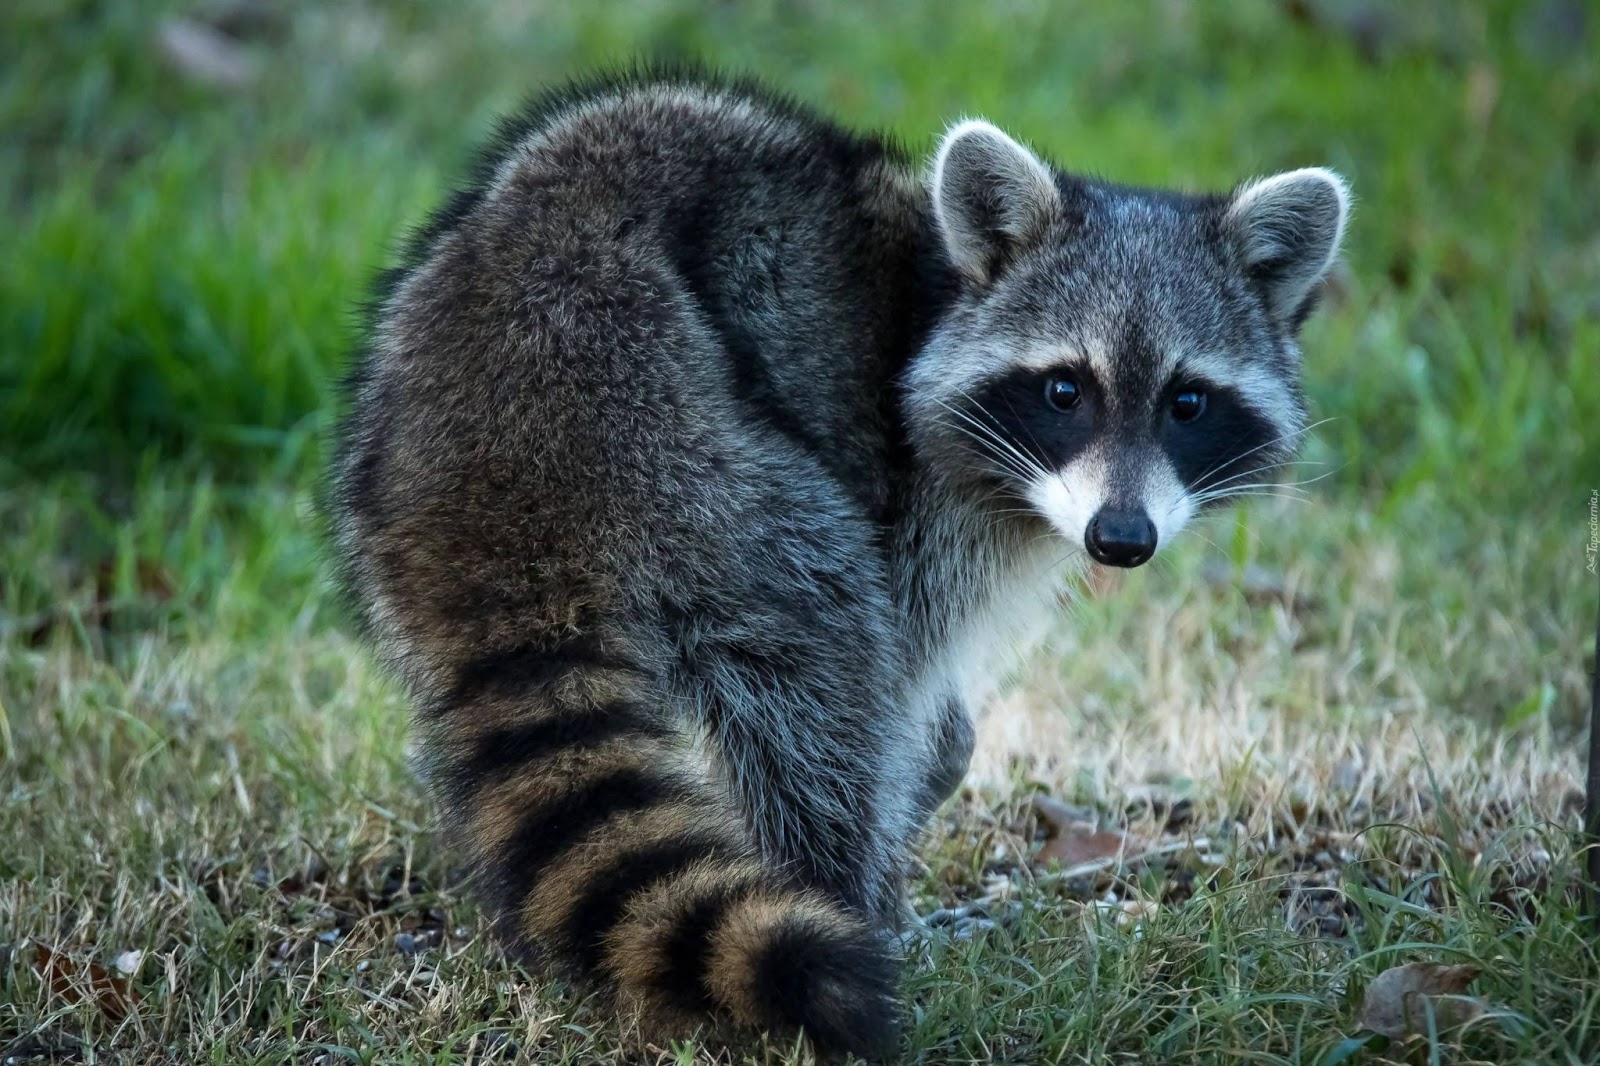 How Fast Are Raccoons